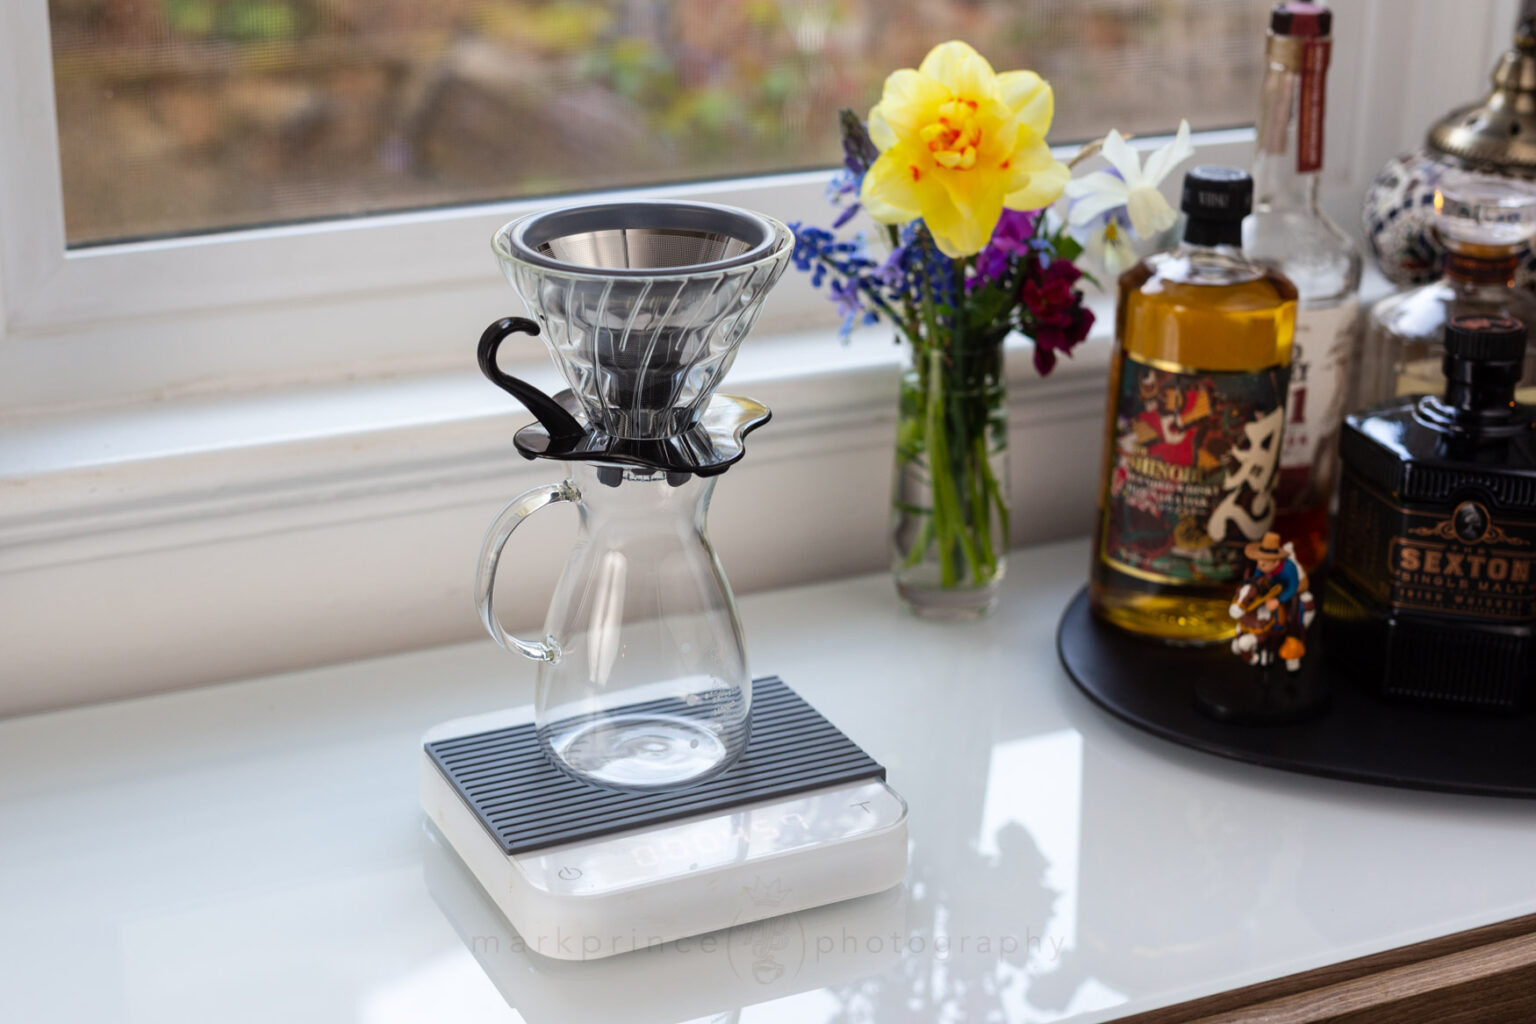 The Kone Mini sitting inside a glass Hario V60 filter holder on top of a Hario coffee beaker.